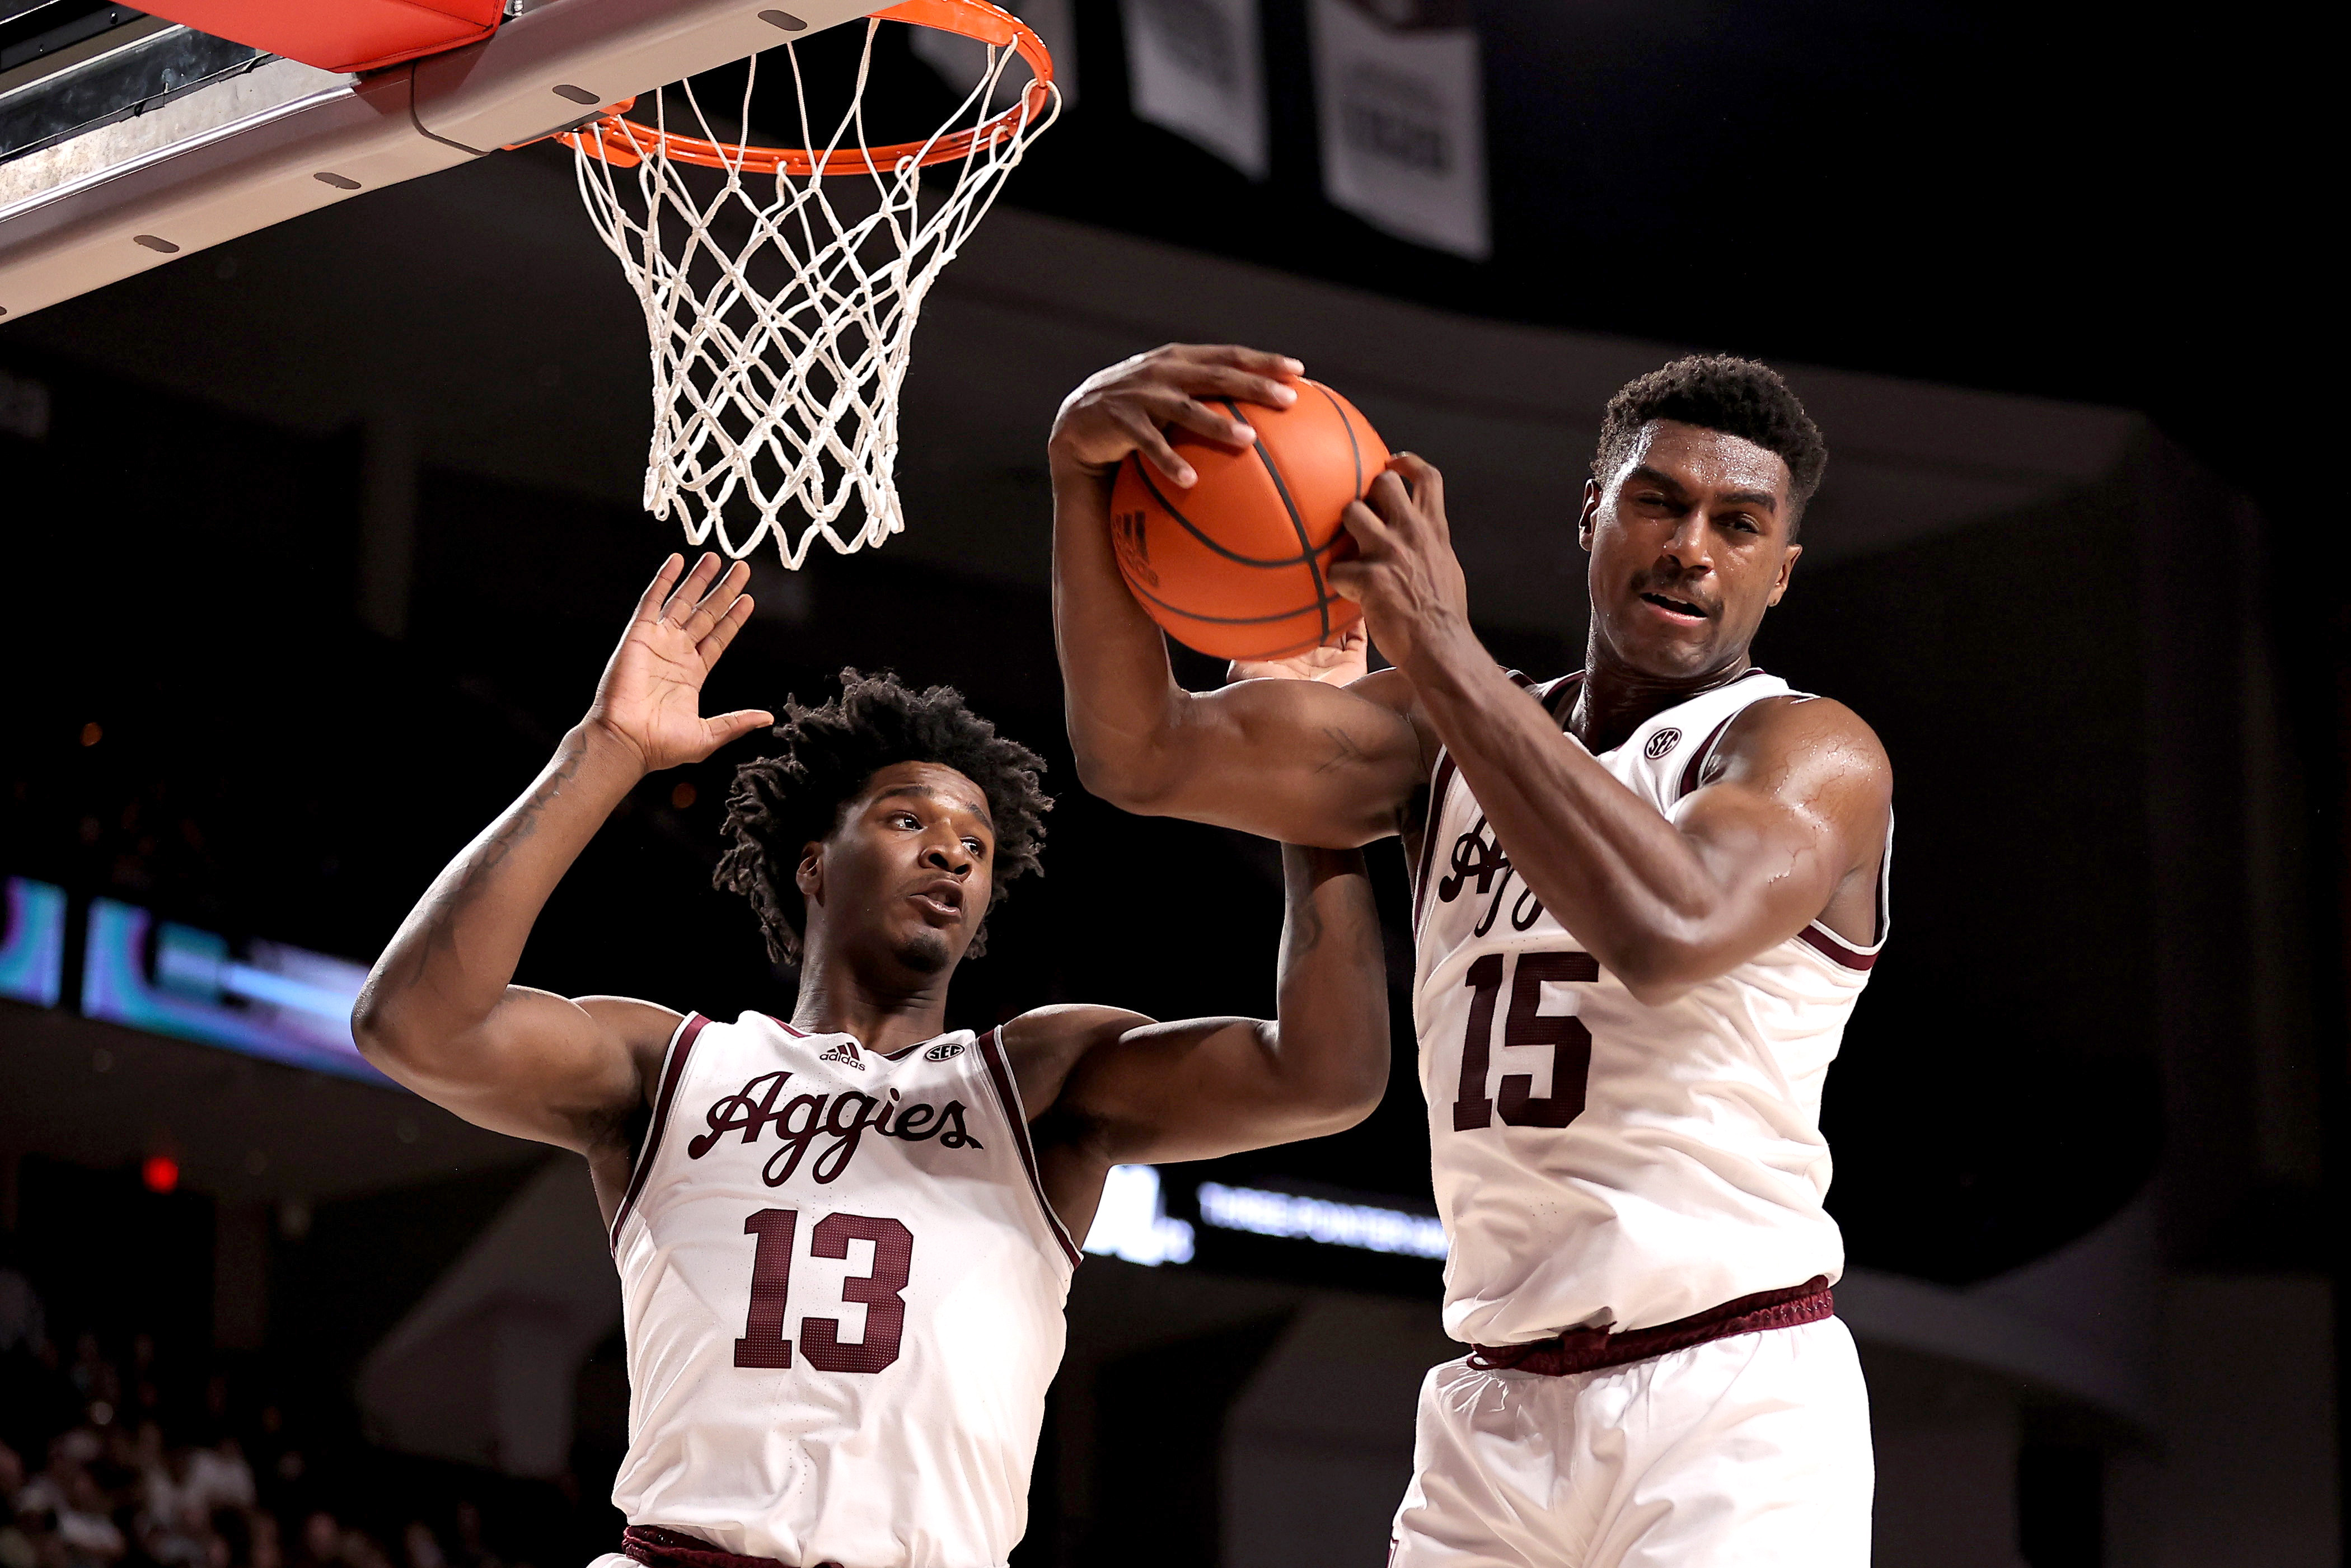 Texas A&M Upsets No. 20 Missouri in College Station